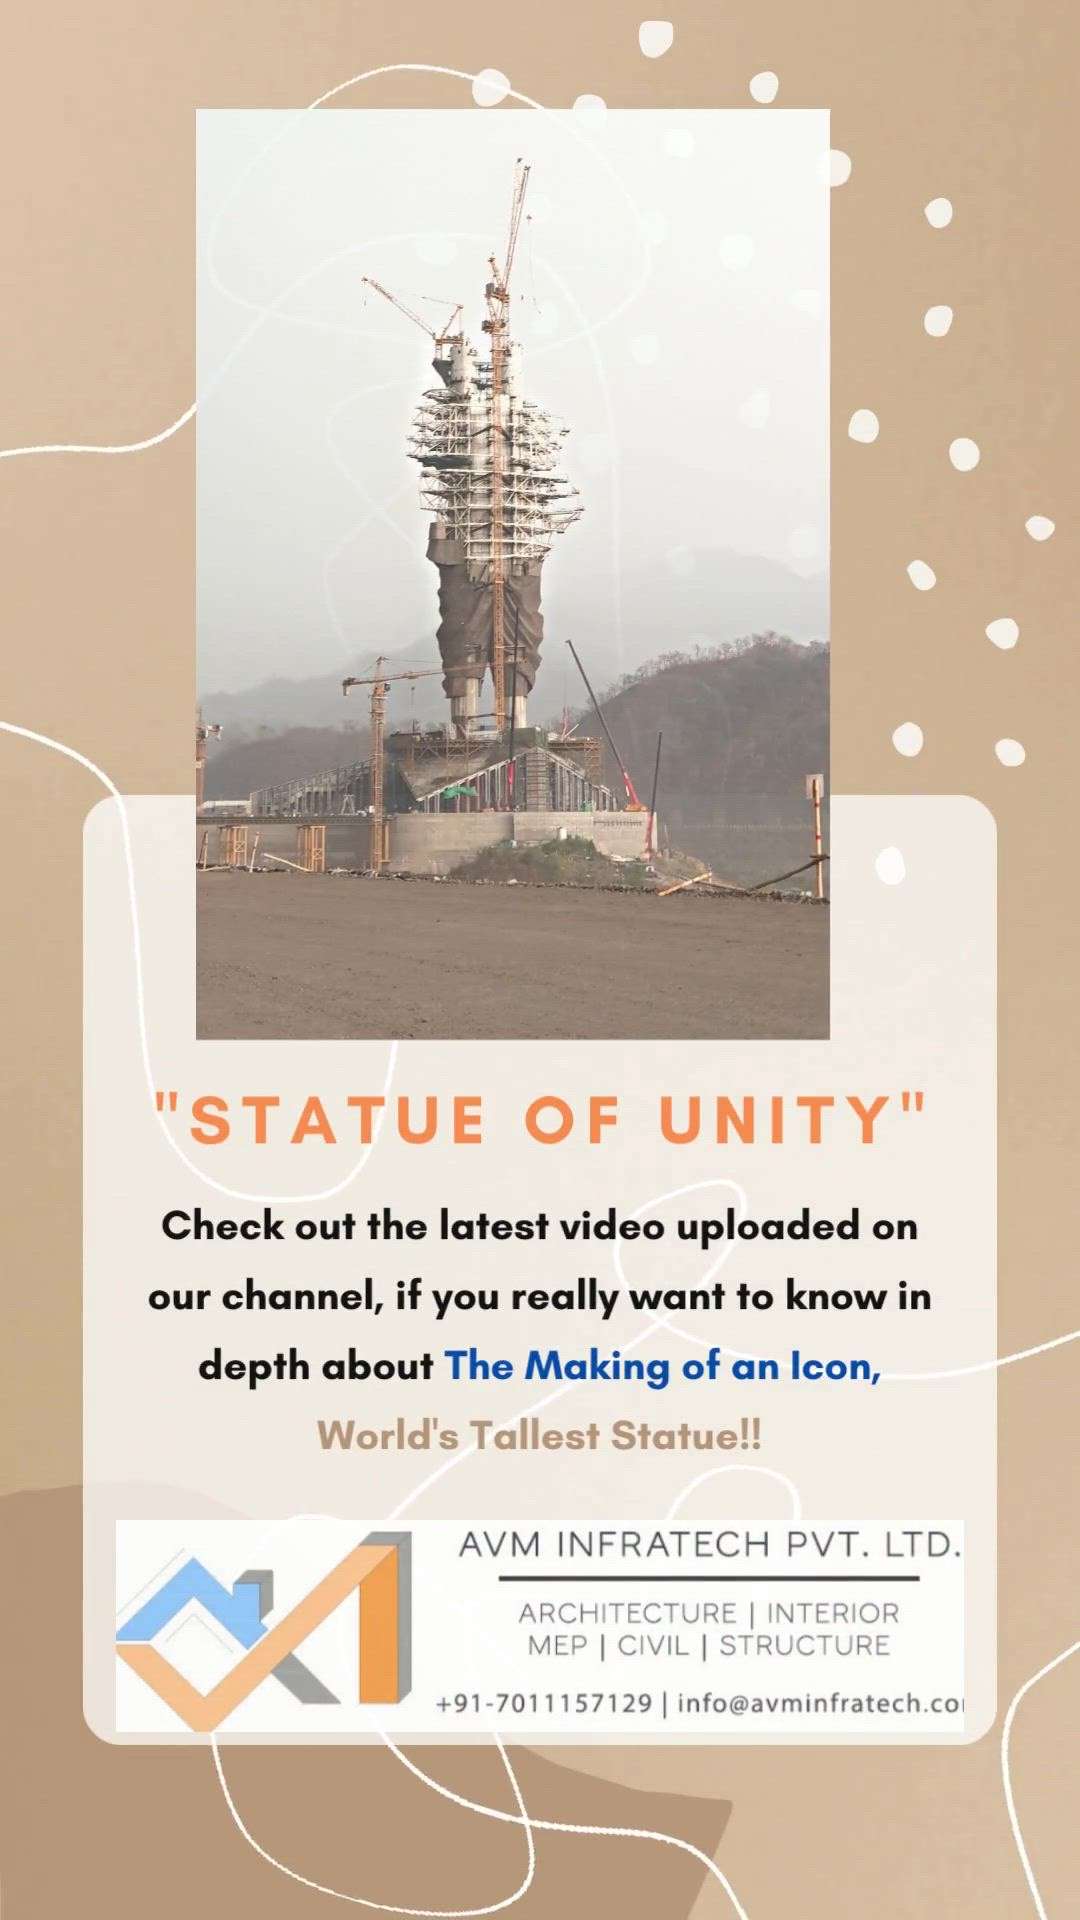 Are you really interested in knowing The Making of an Icon? Let's check it out from the Architect worked in Statue of Unity.
Link: https://youtu.be/32dckrCCrm4


Follow us for more such amazing updates.
.
.
#statue #statueofunity #statueofequality #unity #runforunity #unitymarch #nationalunityday #worldtalleststatue #tallest #talleststatue #largest #varodara #gujarat #kevadia #sardar #sardarvallabhbhaipatel #birthanniversary #pmmodi #narendramodi #primeminister #people #engineering #engineeringmarvel #marvel #architect #architecture #vibes #architectural #civil #construction